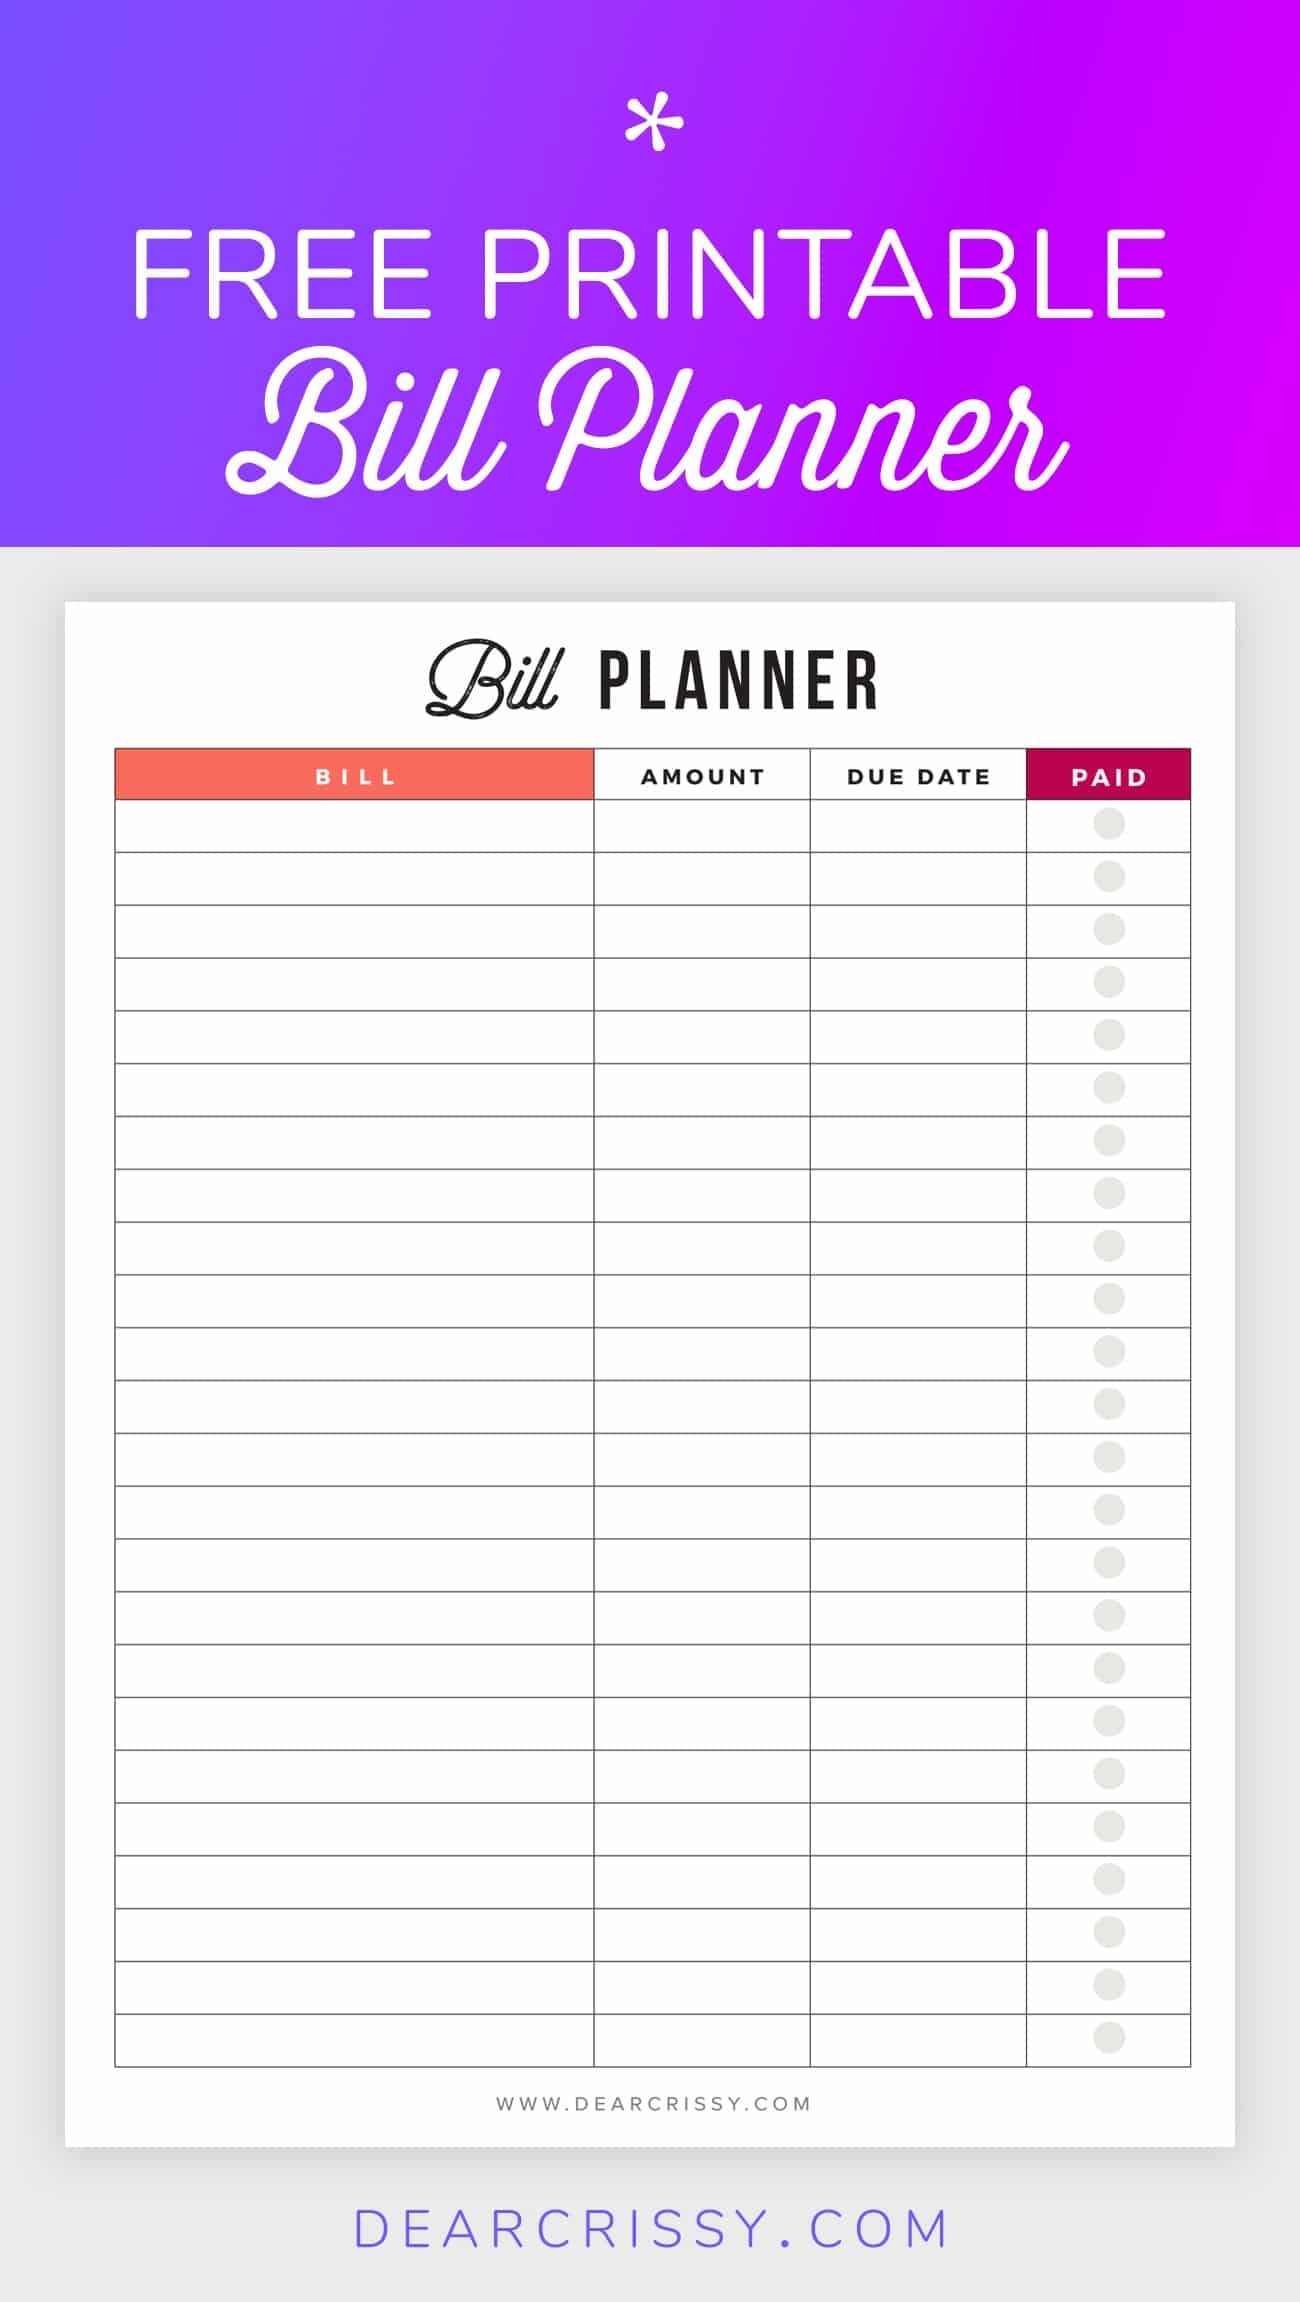 Bill Planner Printable - Pay Down Your Bills This Year!-Free Printable Monthly Bills